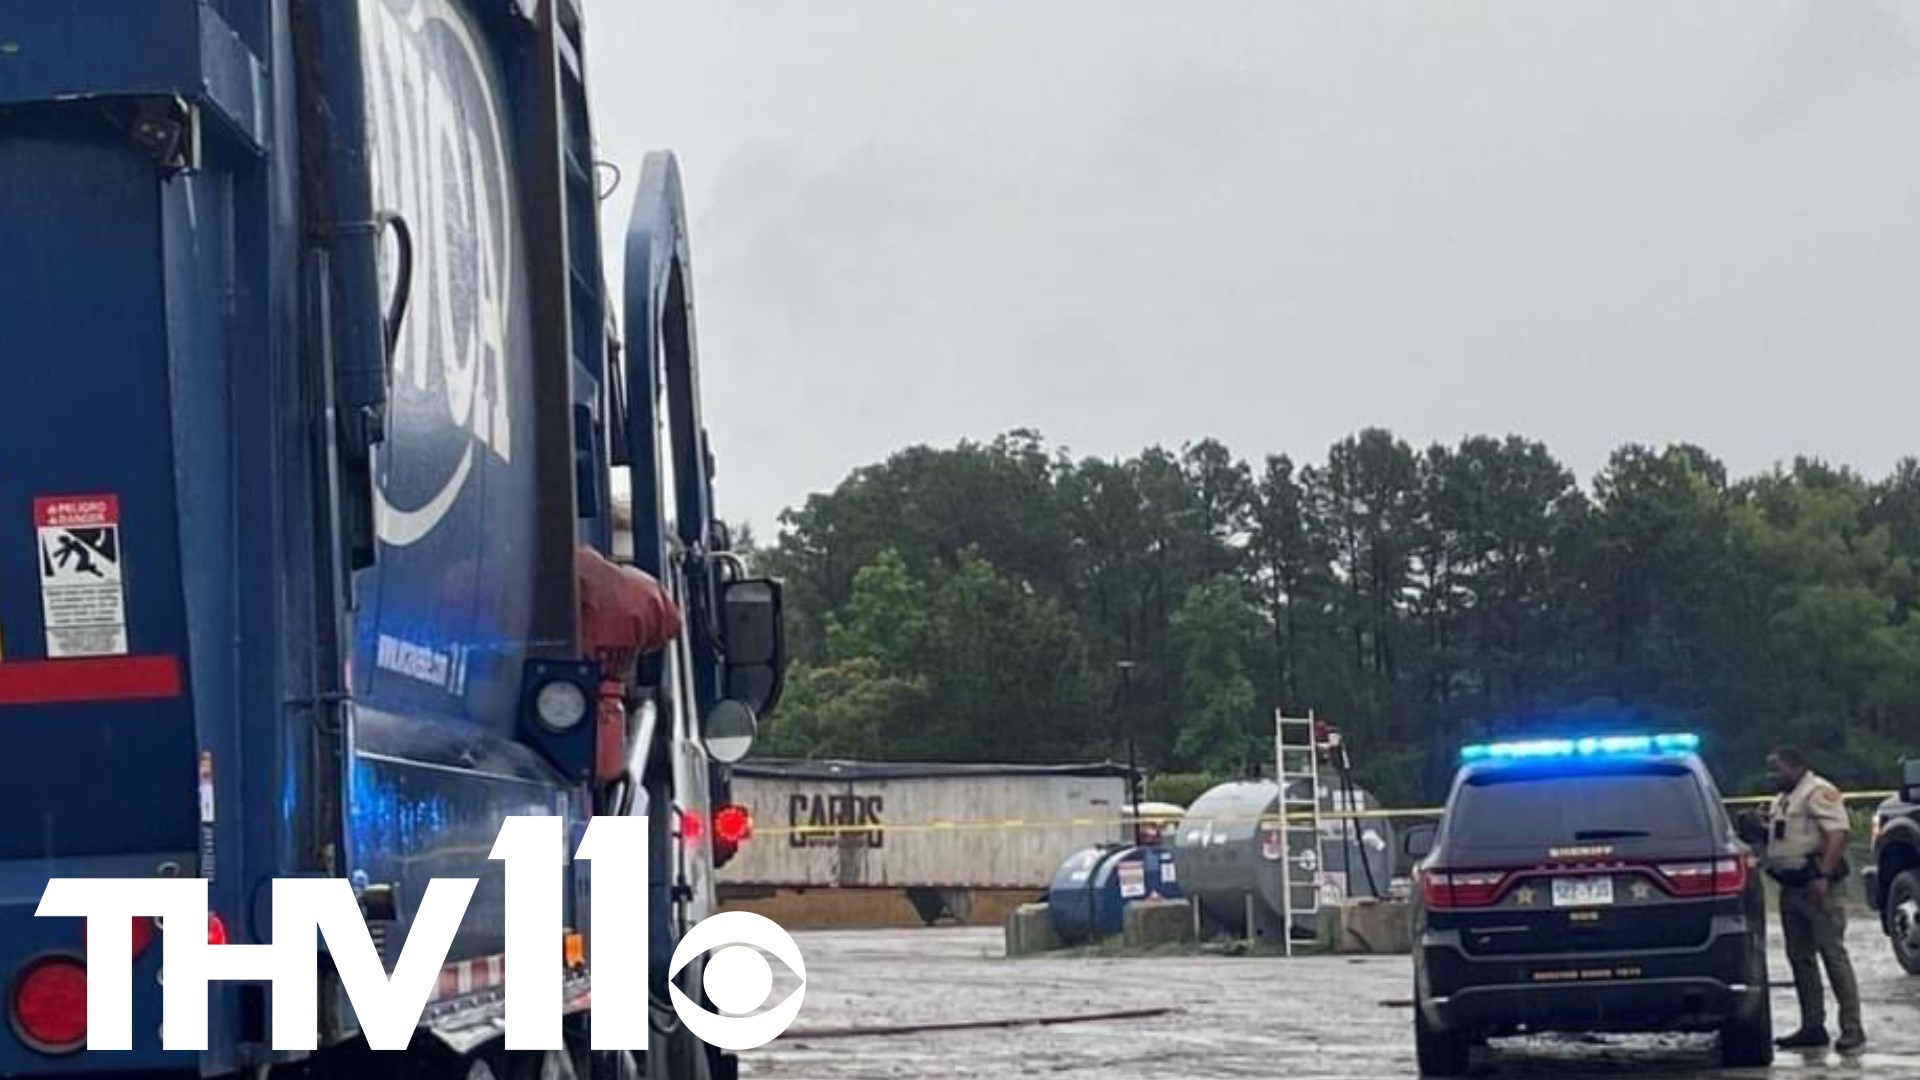 Deputies are responding to a scene scene where a dead body was found in a truck that was being offloaded at Central Arkansas Recycling in Little Rock